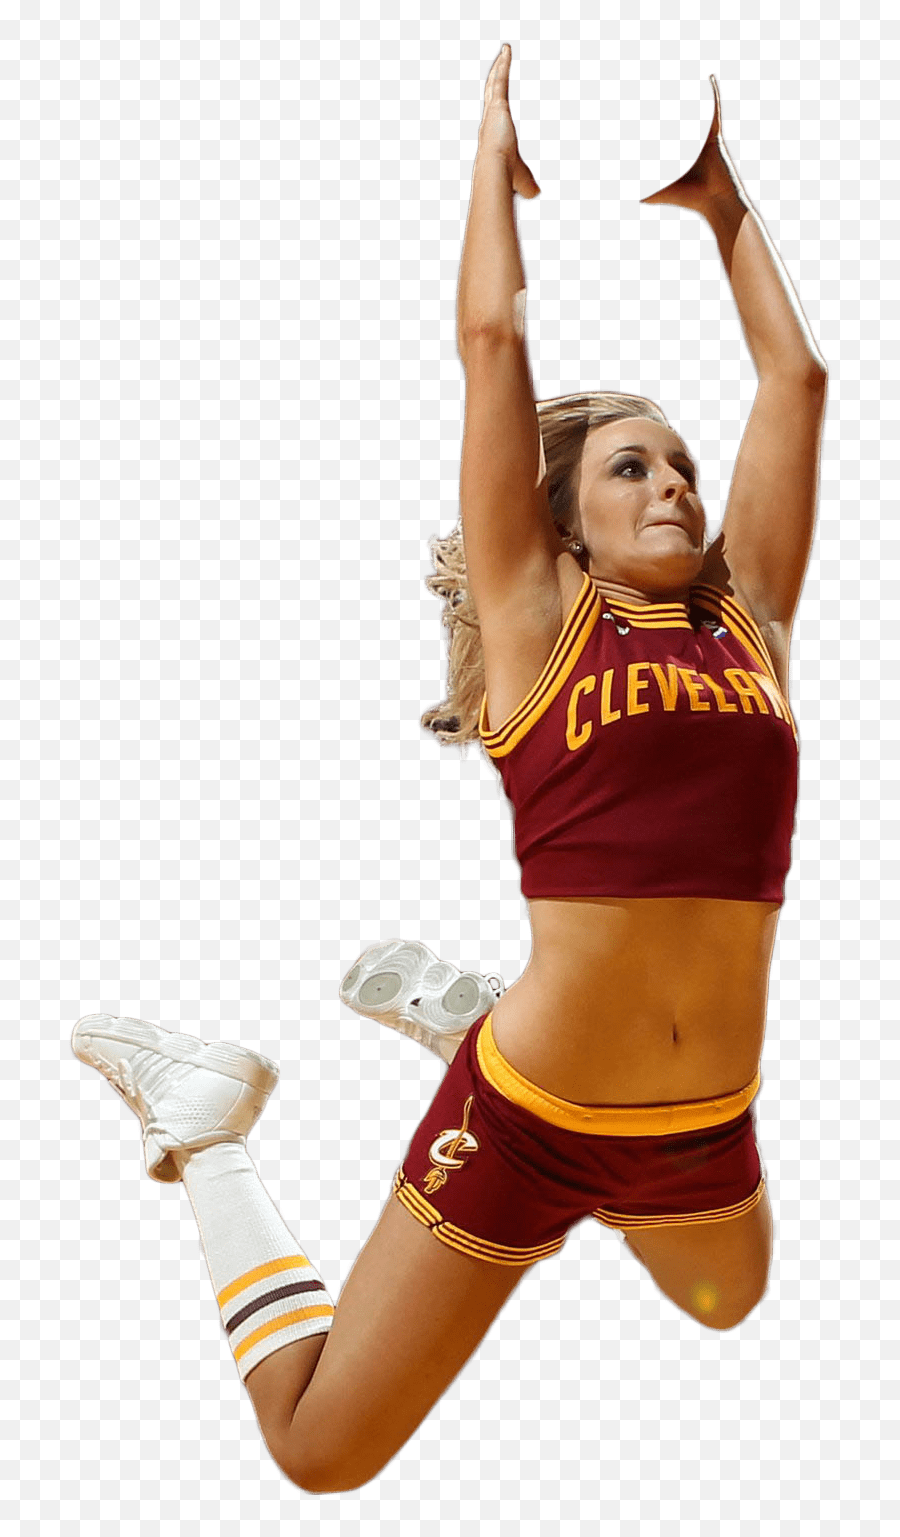 Cleveland Cheerleader Png Image For Free - Cheerleader Png,Cheerleaders Png